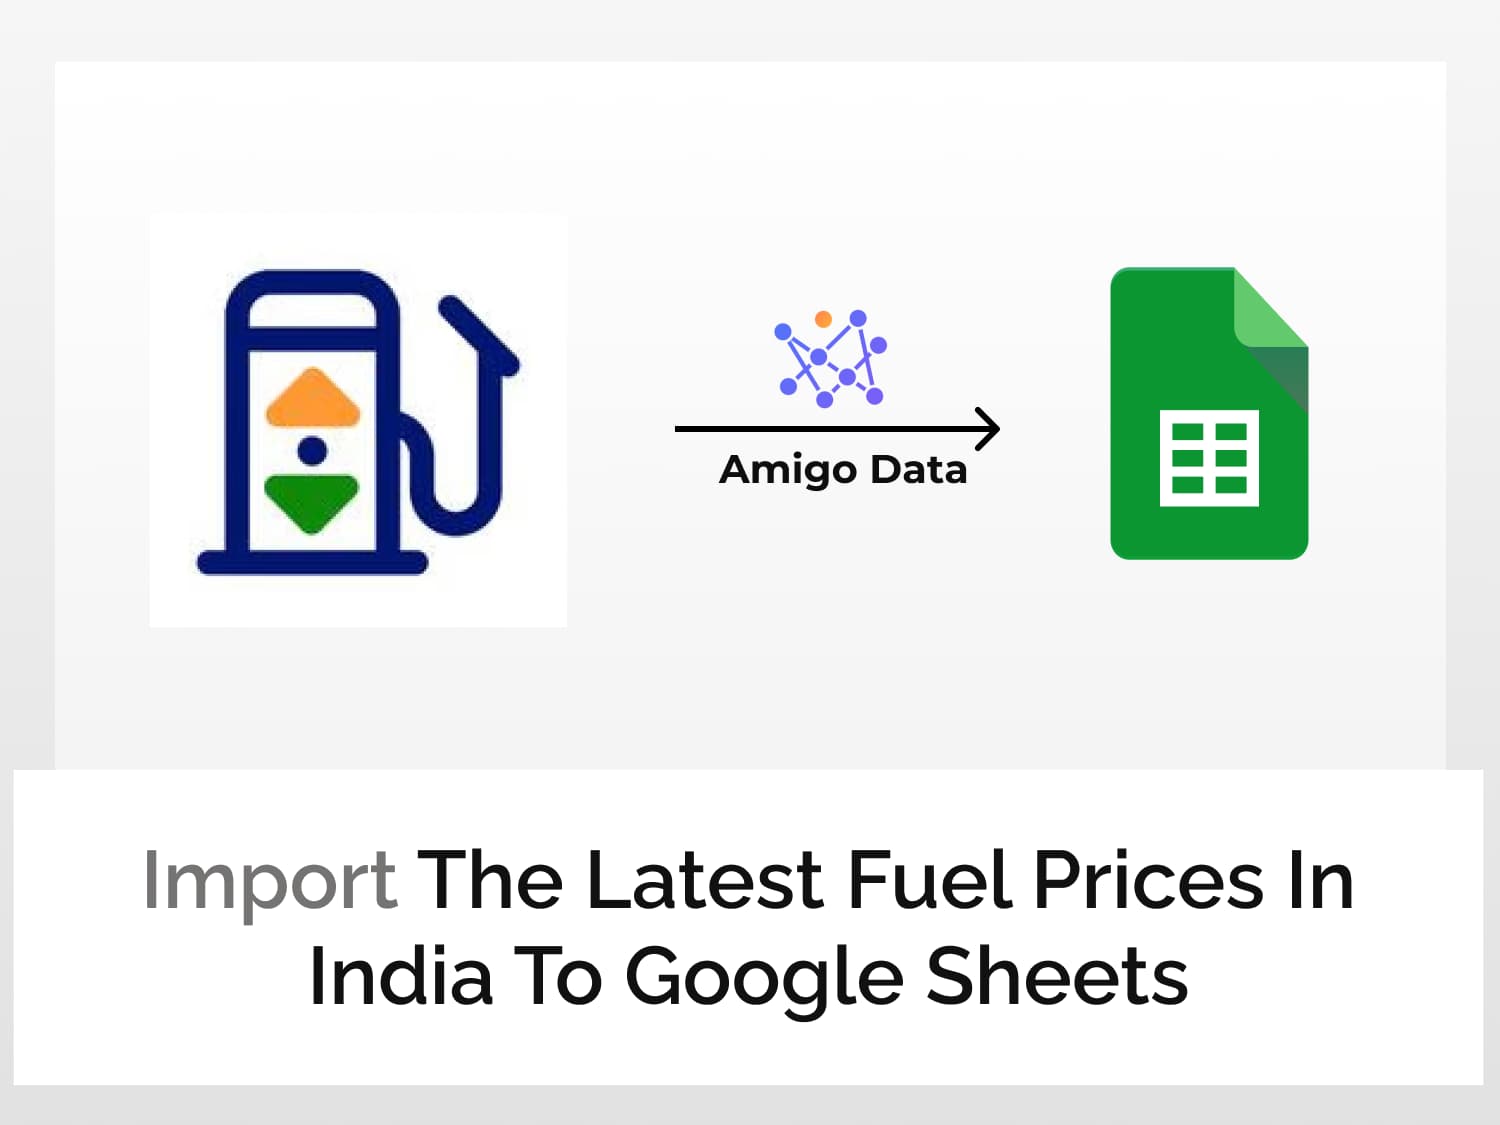 Import the latest fuel prices in India to Google sheets